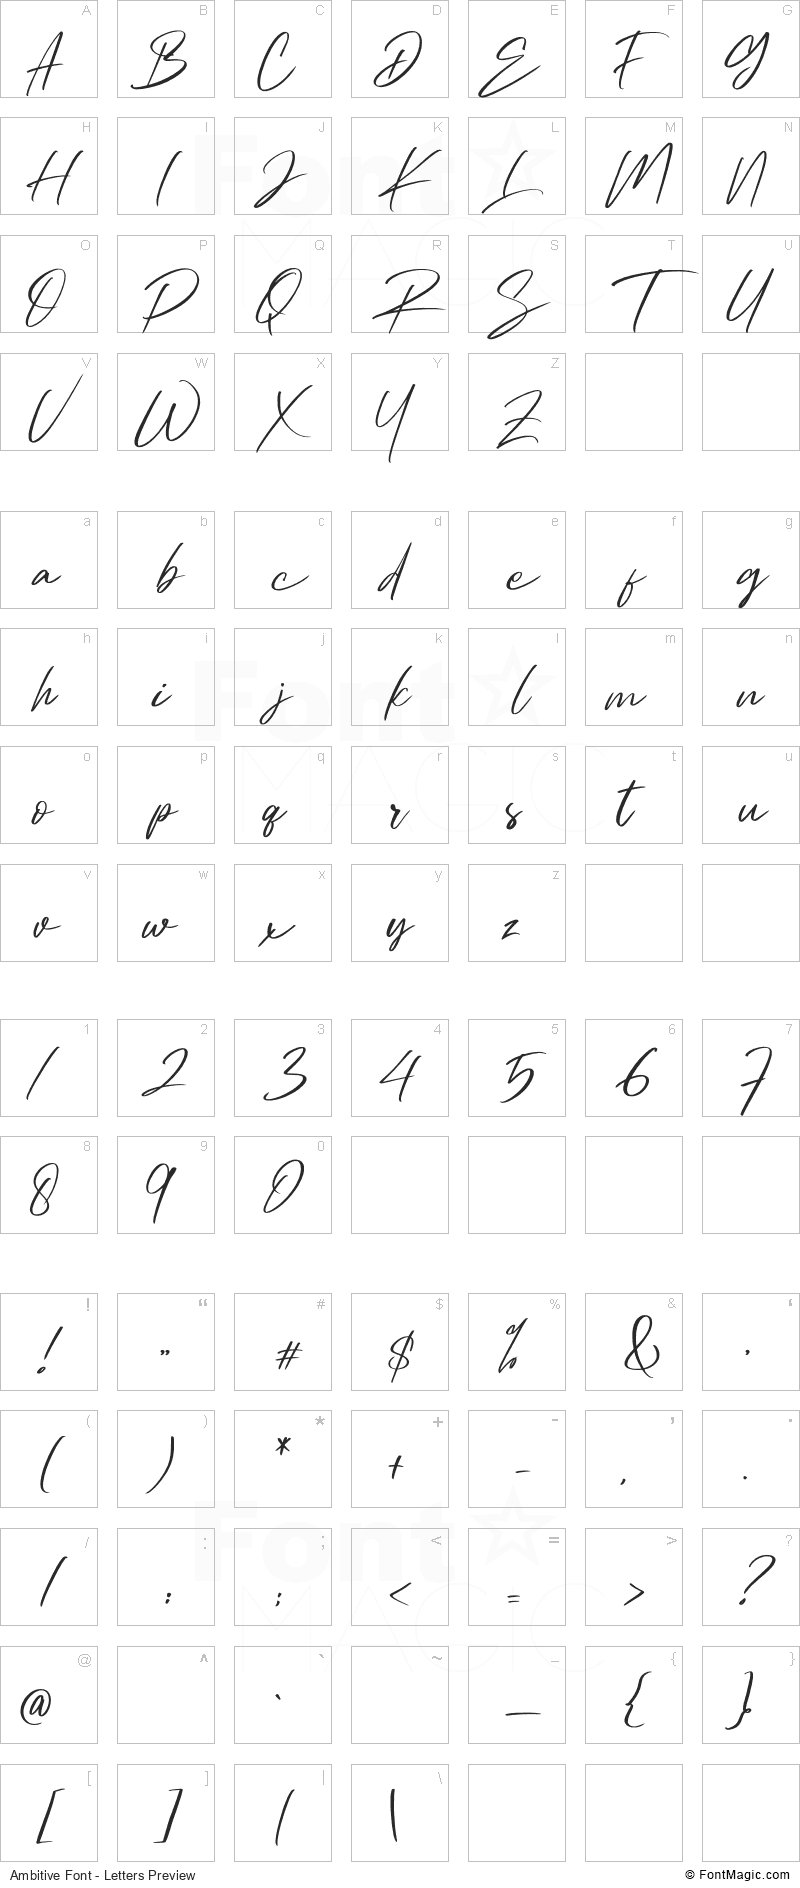 Ambitive Font - All Latters Preview Chart